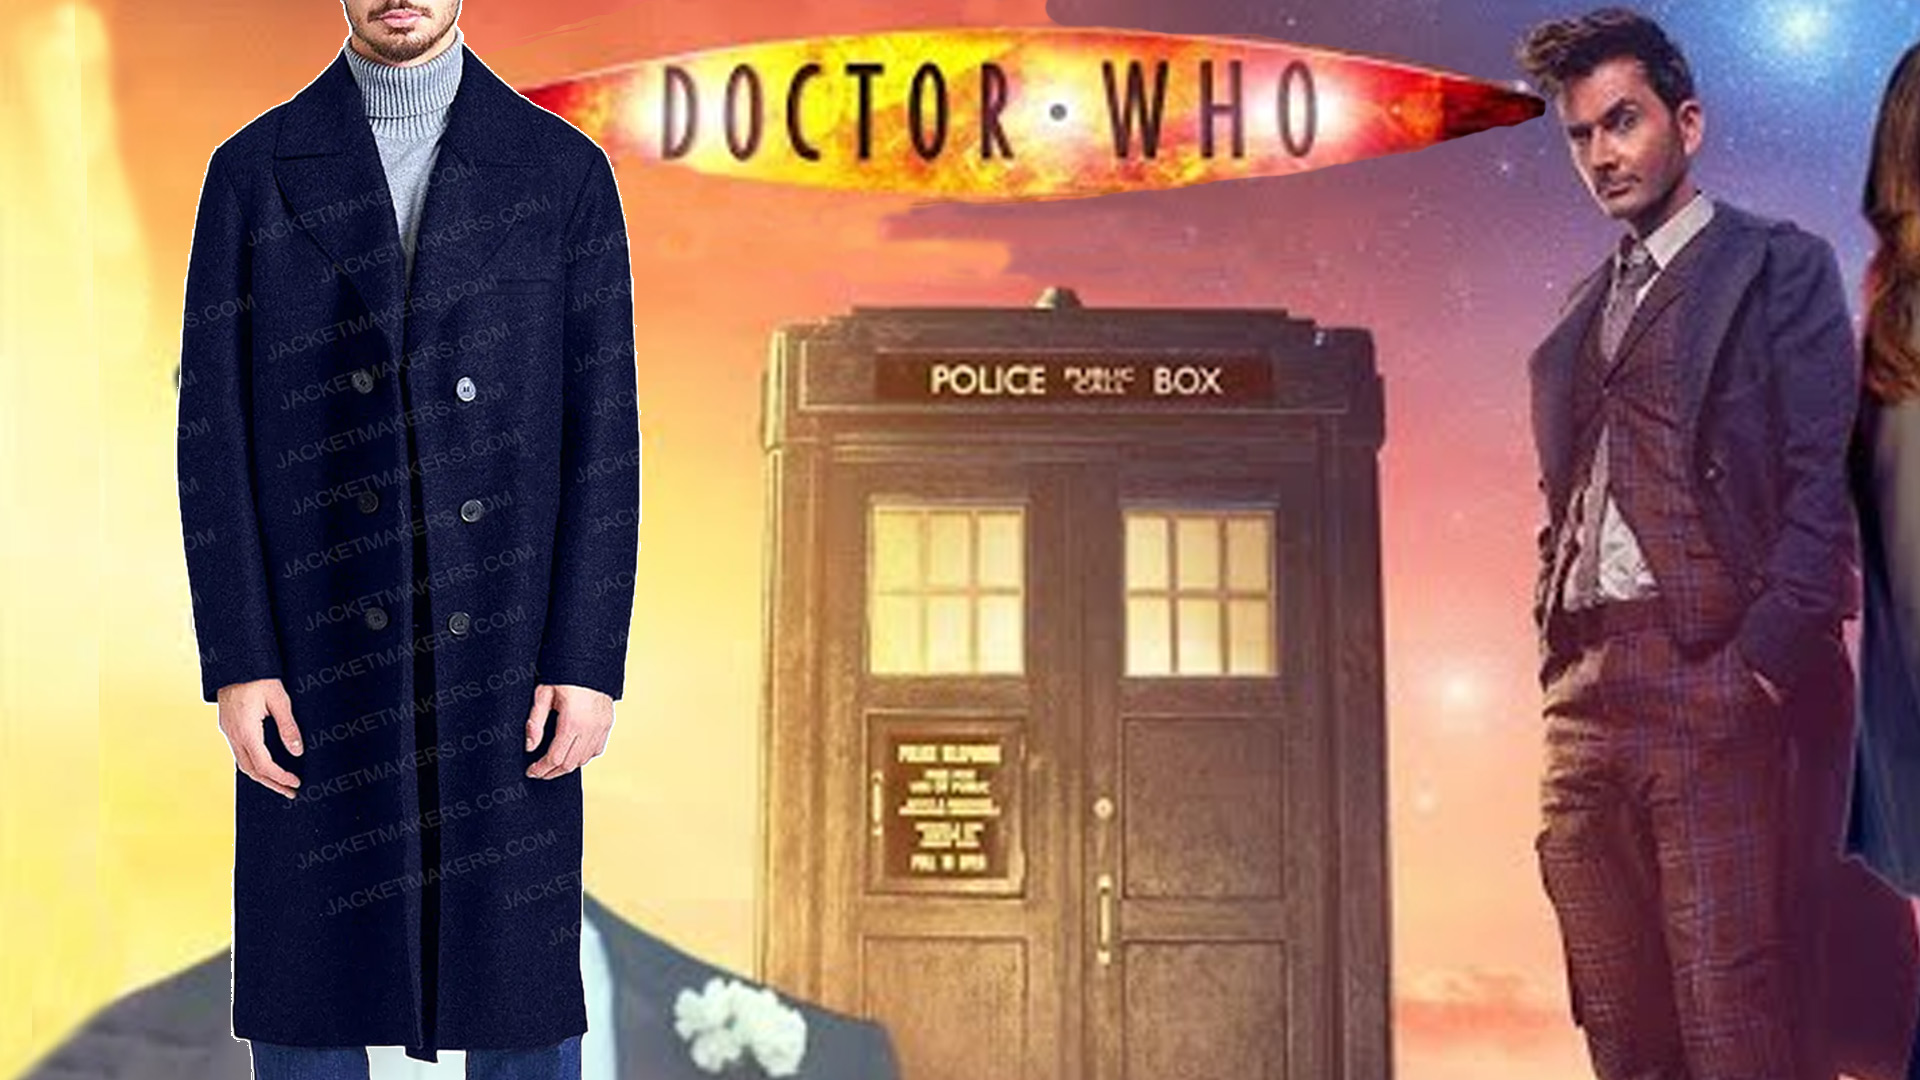 News Alert: The Arrival of the Fourteenth Doctor's Coat